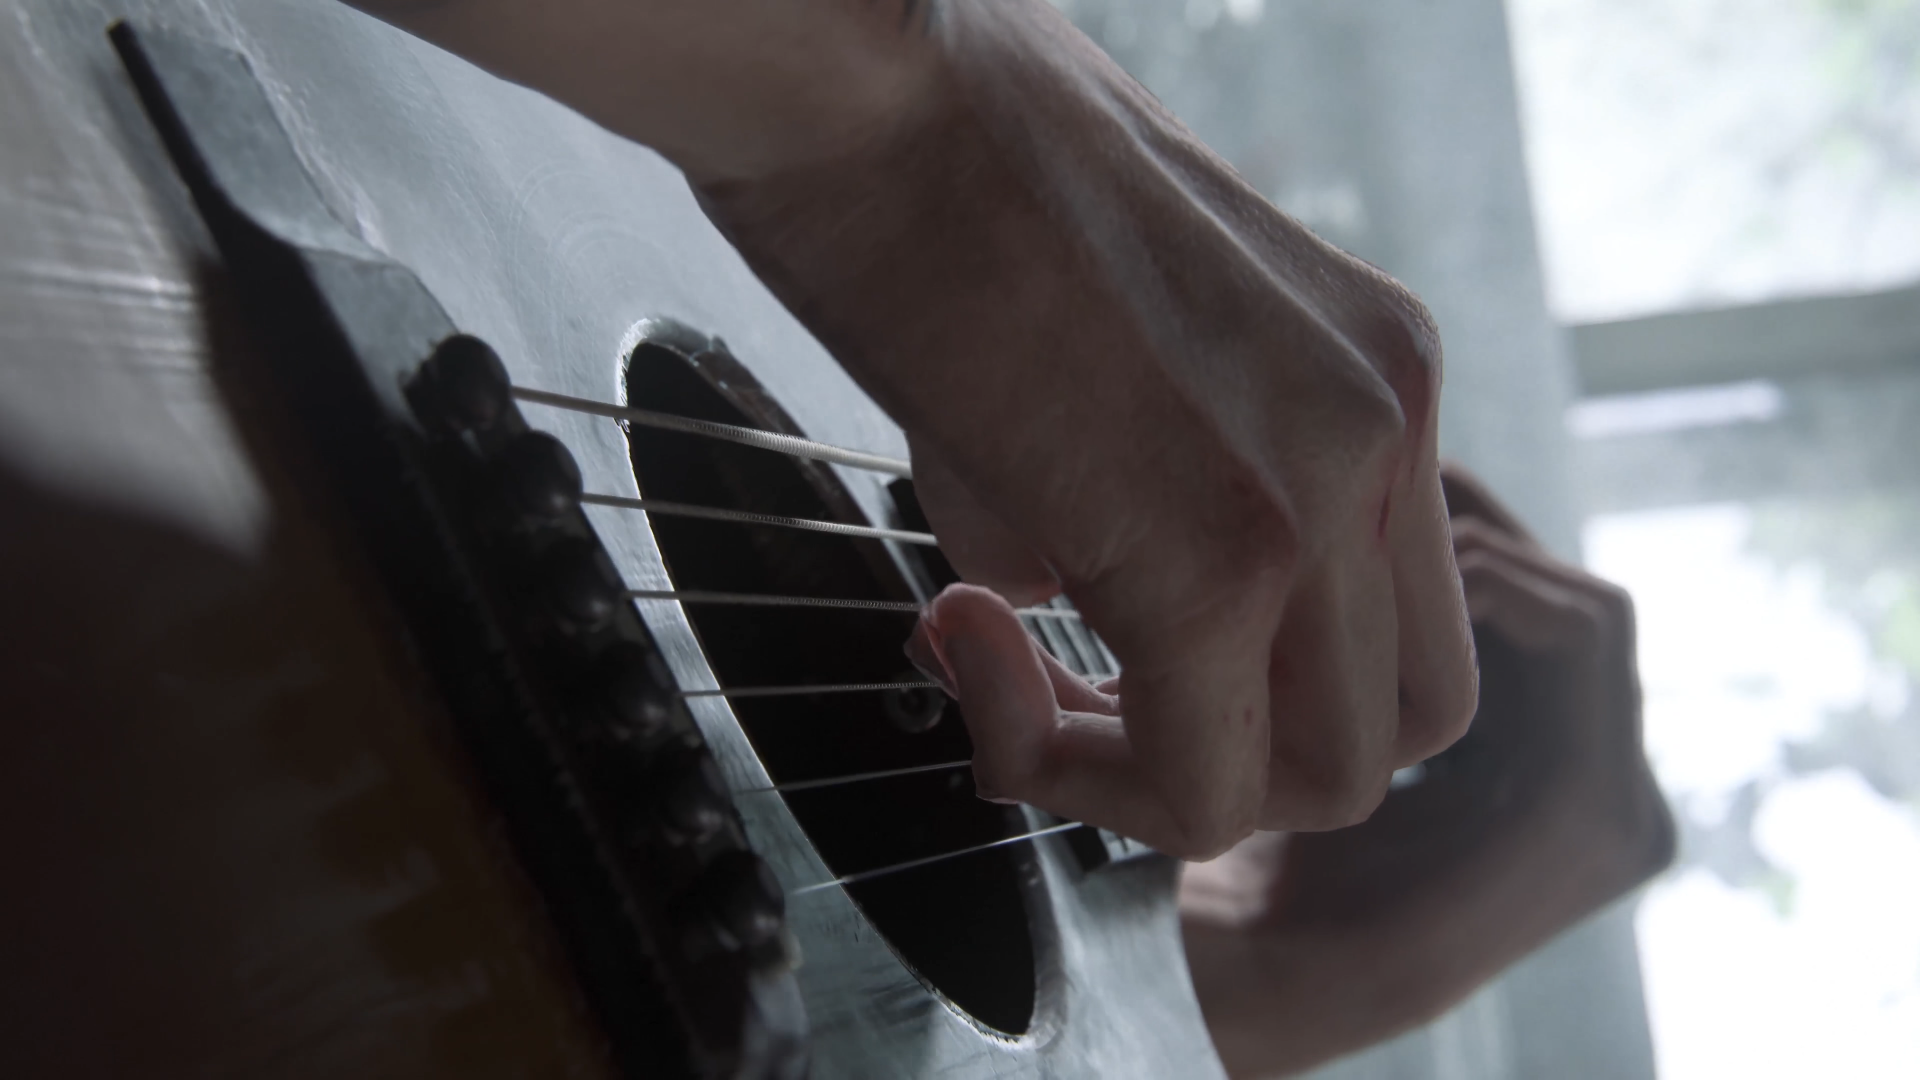 General 1920x1080 The Last of Us 2 video games guitar hands screen shot Ellie Williams closeup musical instrument video game characters Naughty Dog